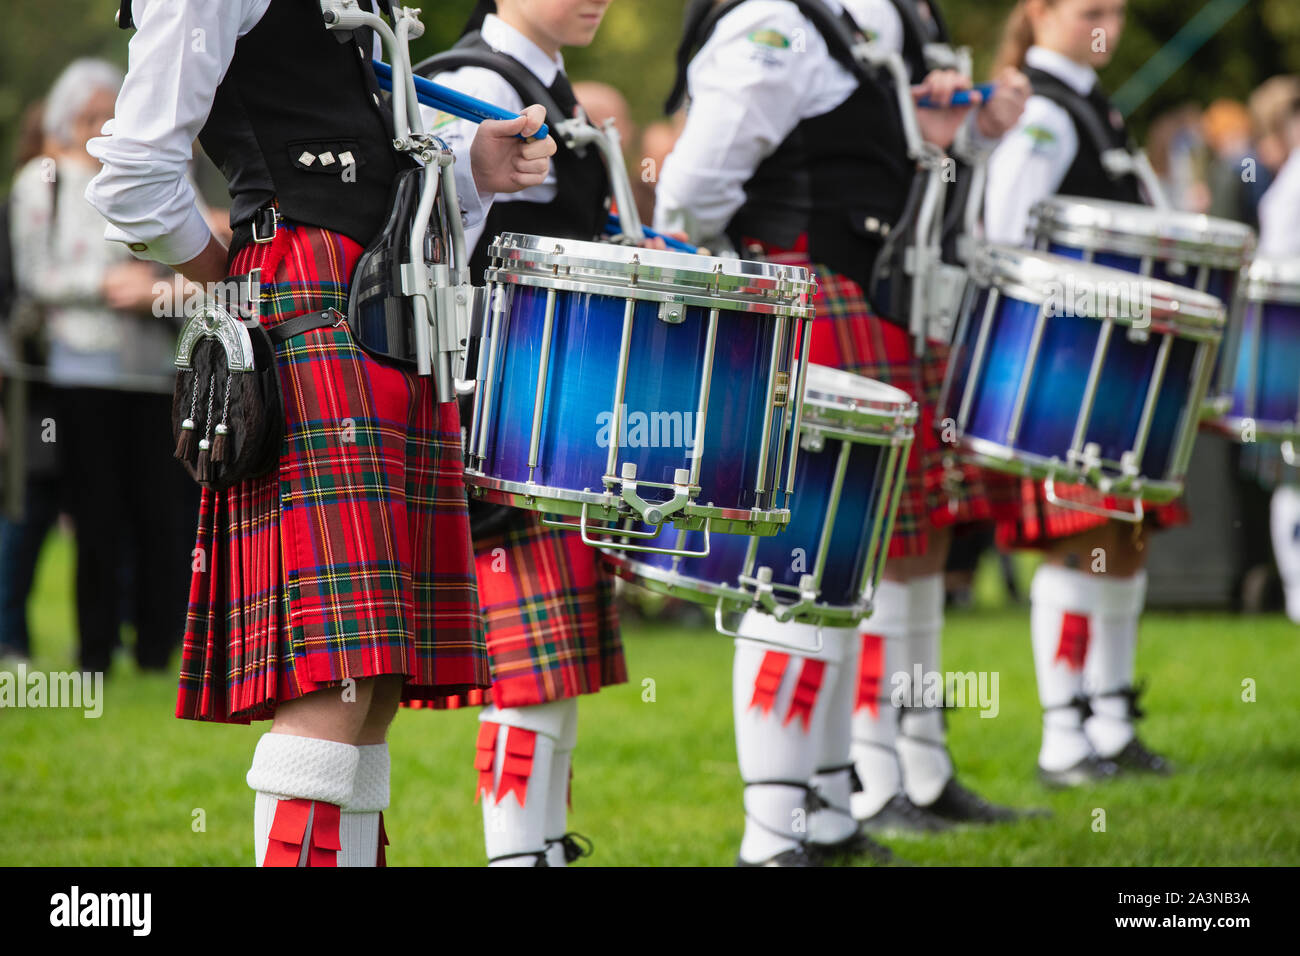 Pipe band drummers drums, sporrans and kilts at Peebles highland games. Scottish borders, Scotland Stock Photo